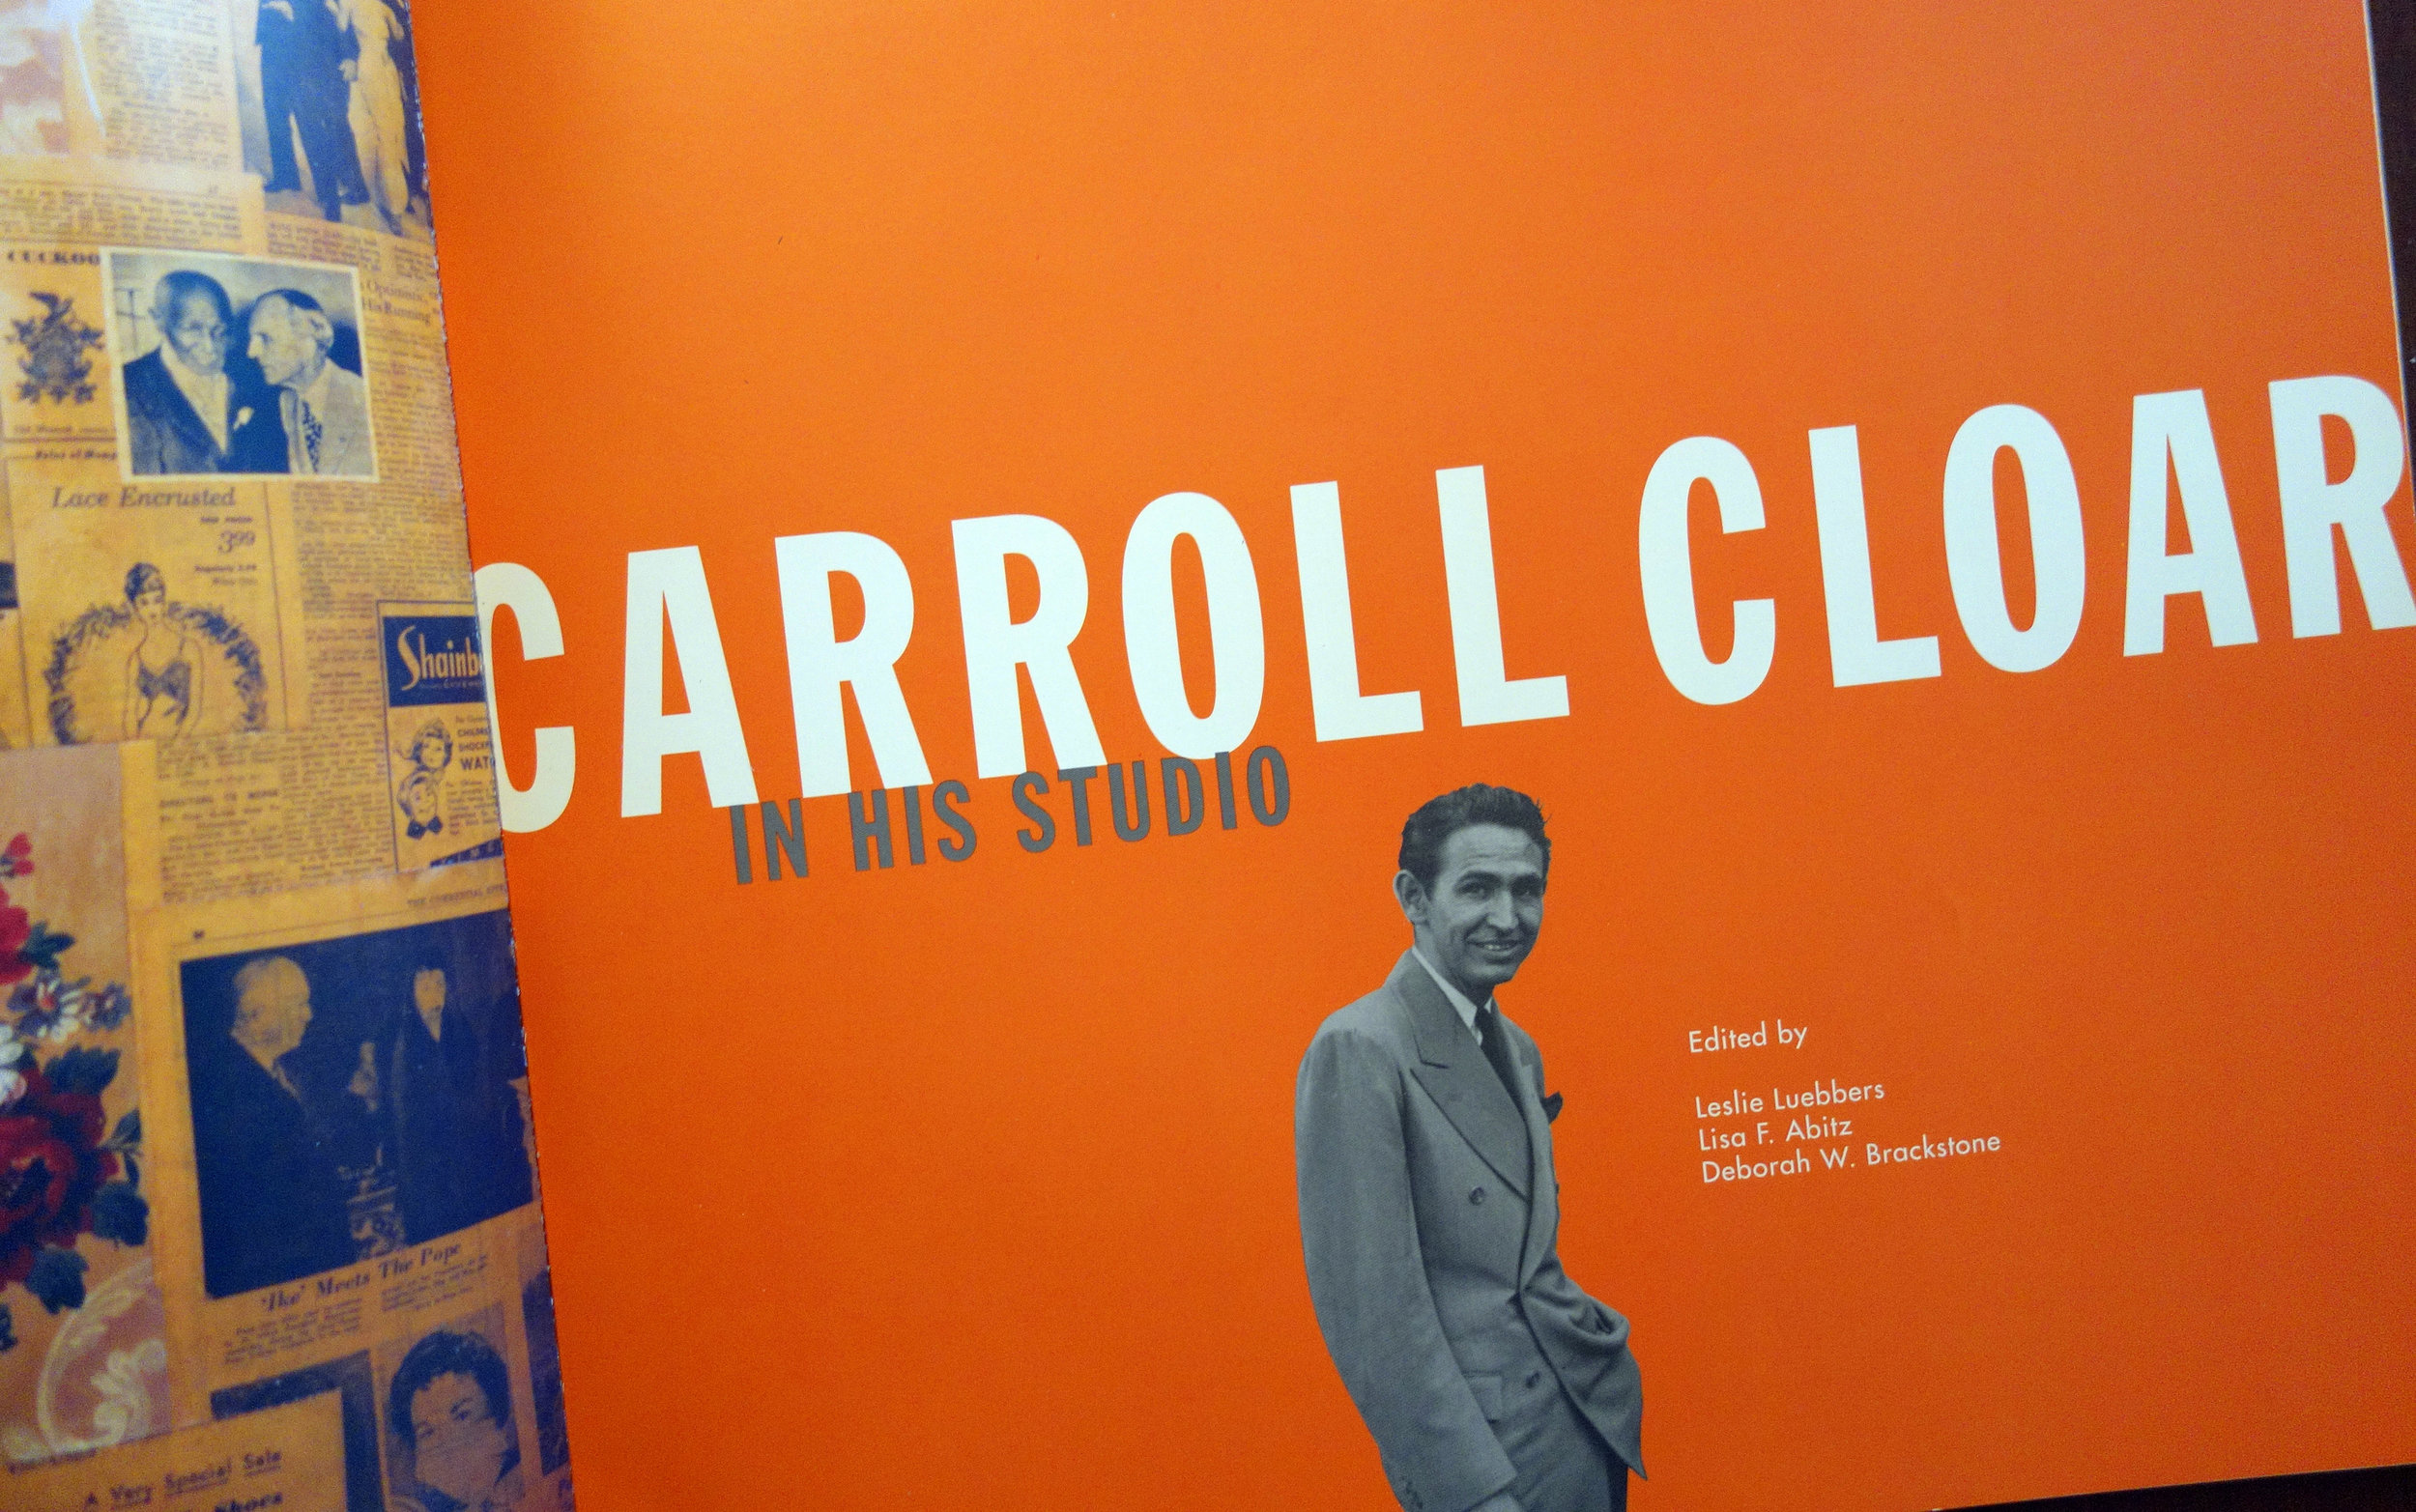  Carroll Cloar in His Studio exhibition catalog  Title page  Creative direction and design by Chuck Mitchell  Published by University Press of Mississippi and AMUM, Art Museum of the University of Memphis 